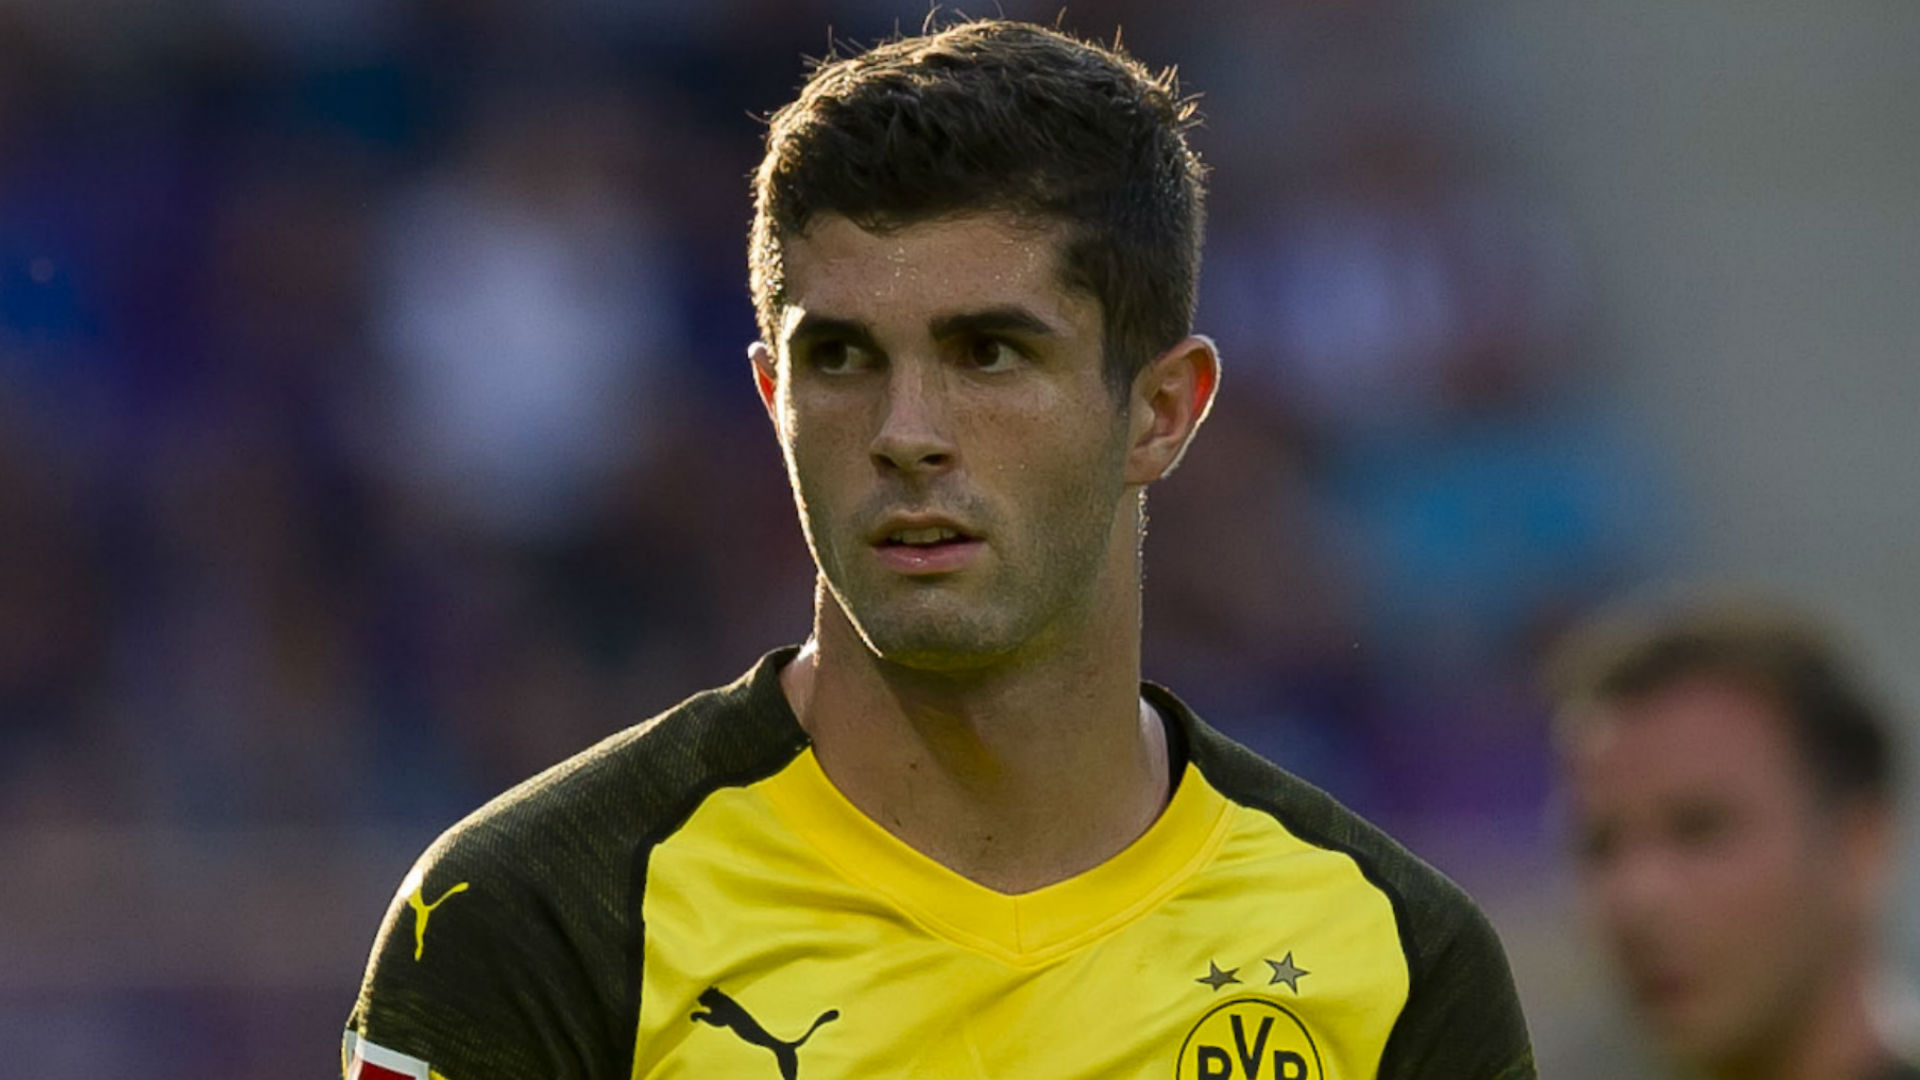 Christian Pulisic makes himself at home as standout in first stop on